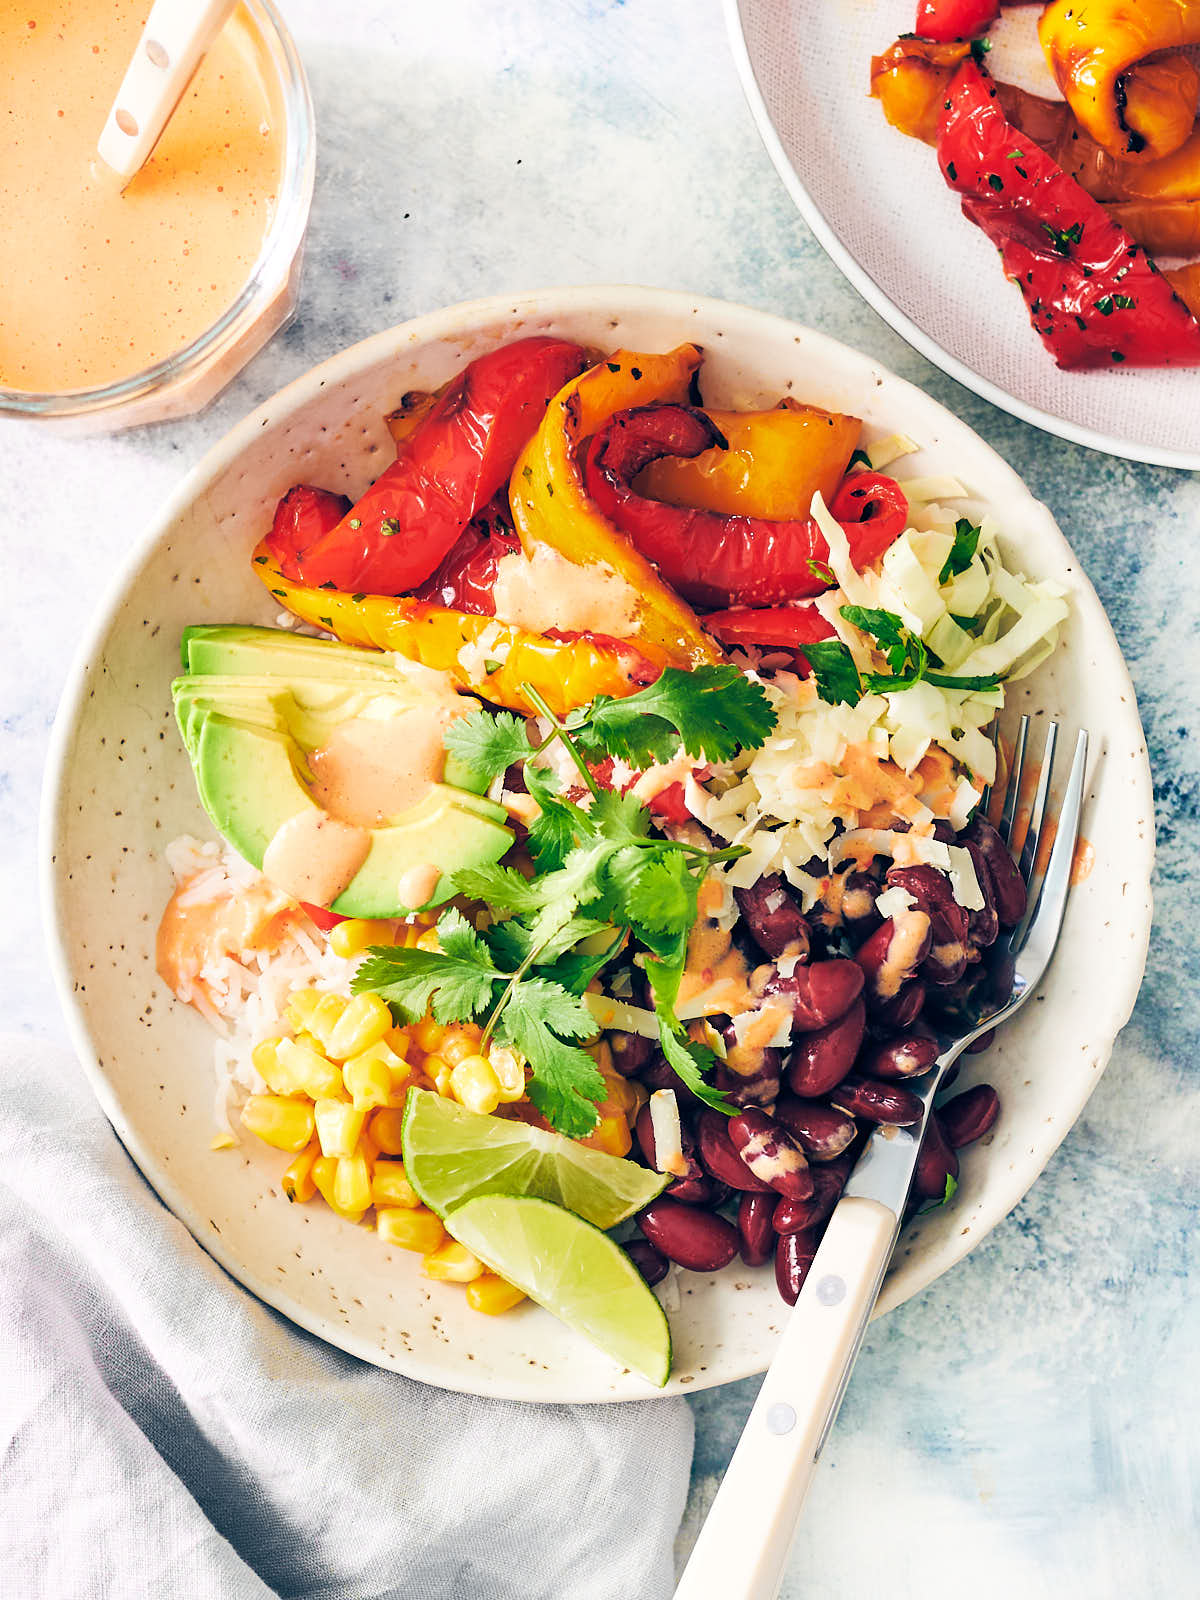 Burrito bowl with air fryer bell peppers, avocado, beans, cheese, and cilantro.